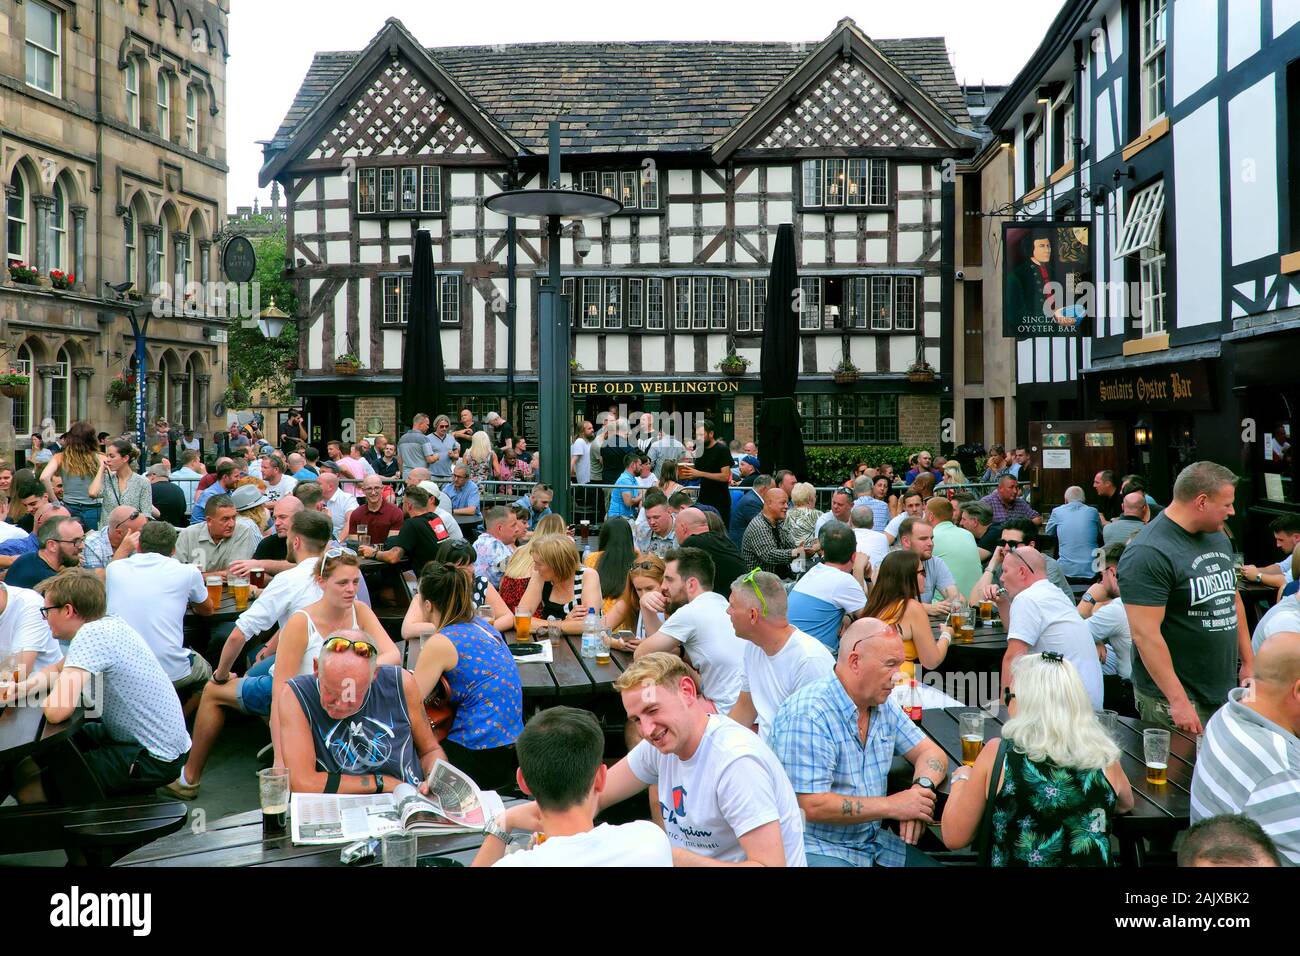 Old Wellington Inn & Sinclair's Oyster Bar, busy with people drinking in beer garden outdoors, Manchester, England, UK, Europe Stock Photo